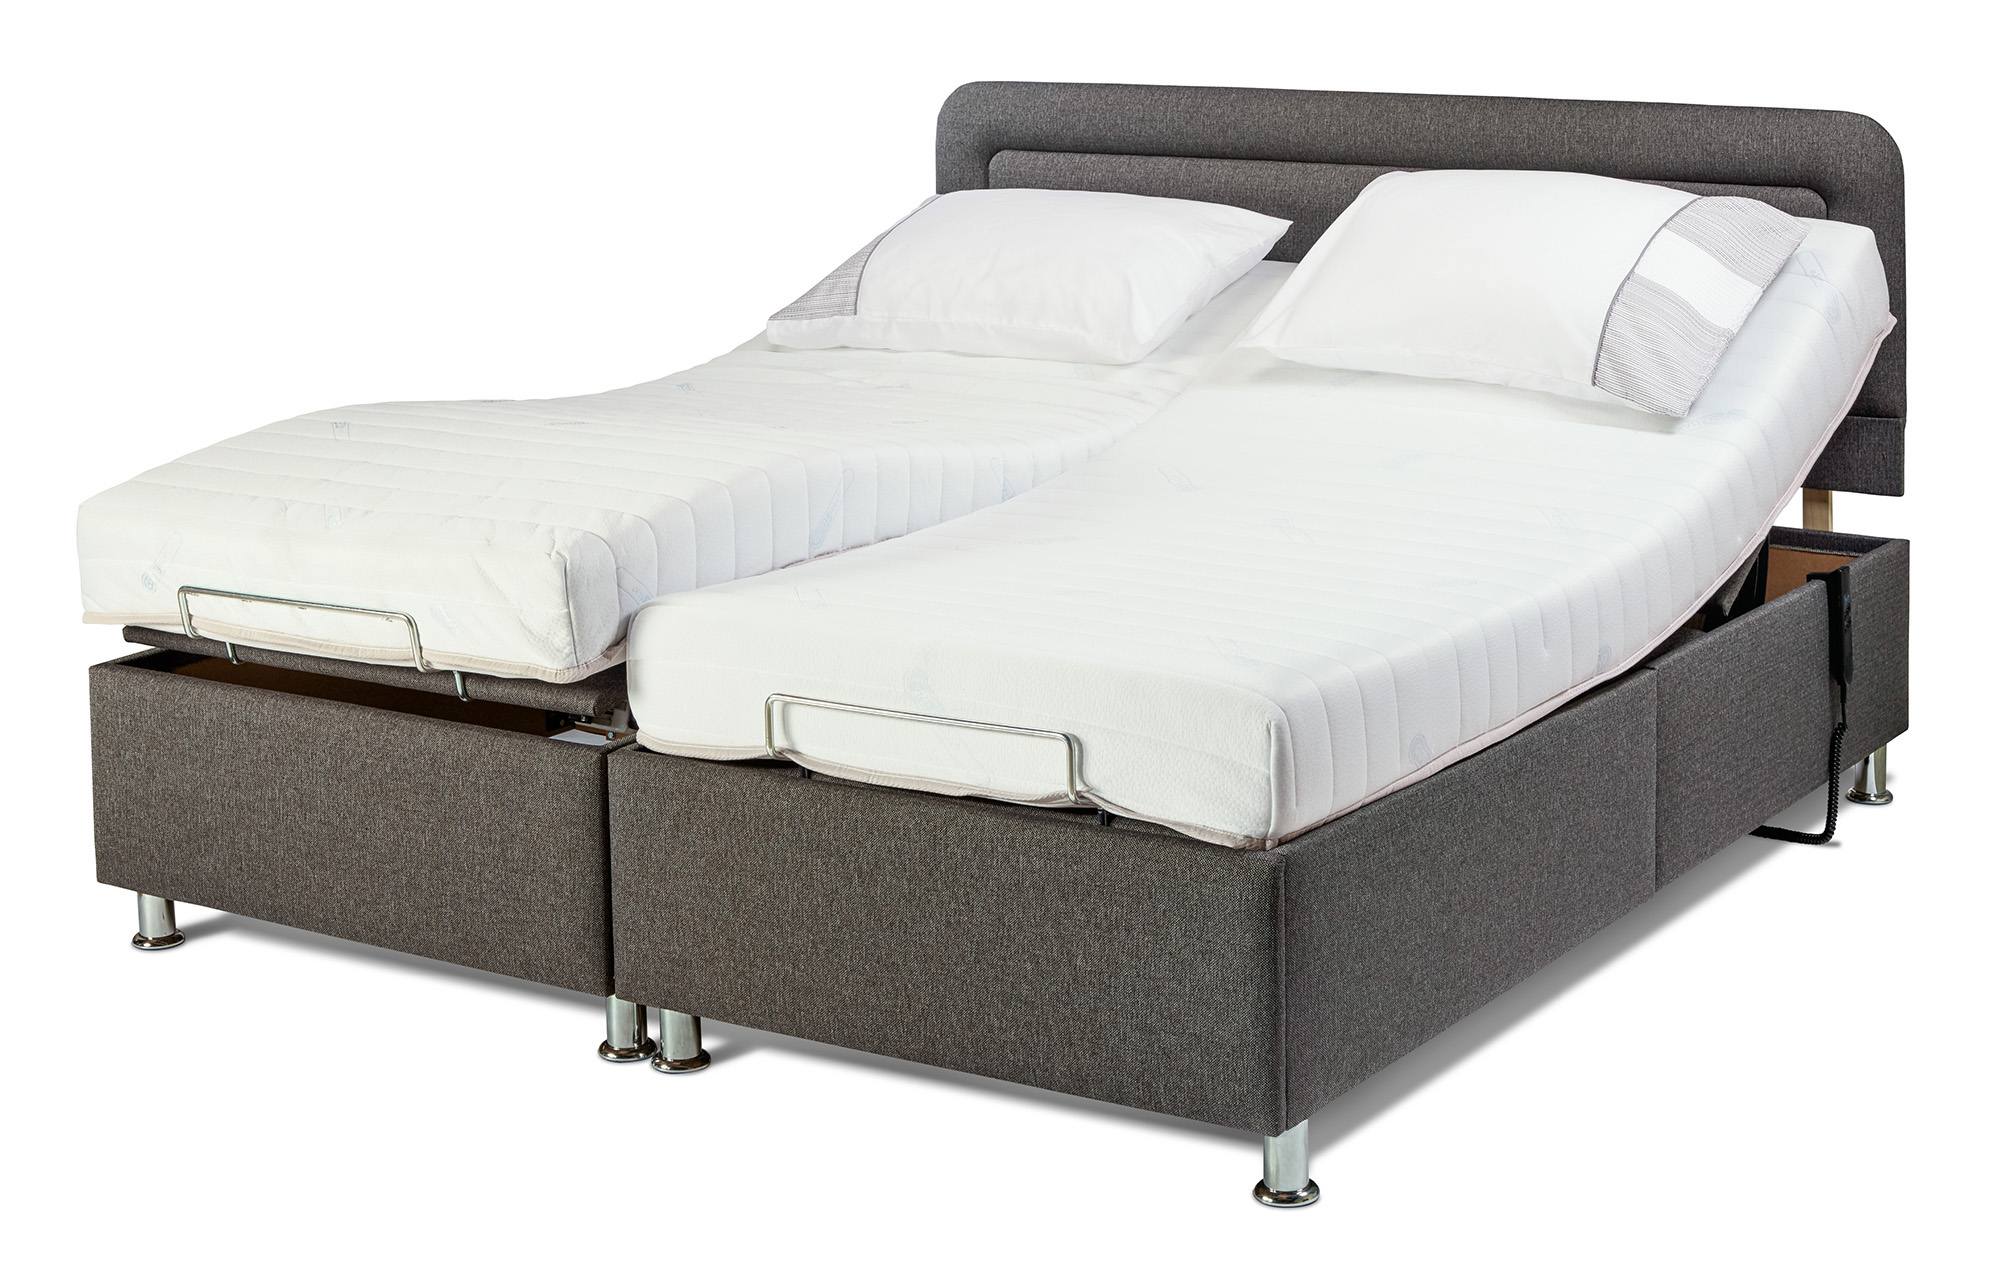 mattresses for super king size beds